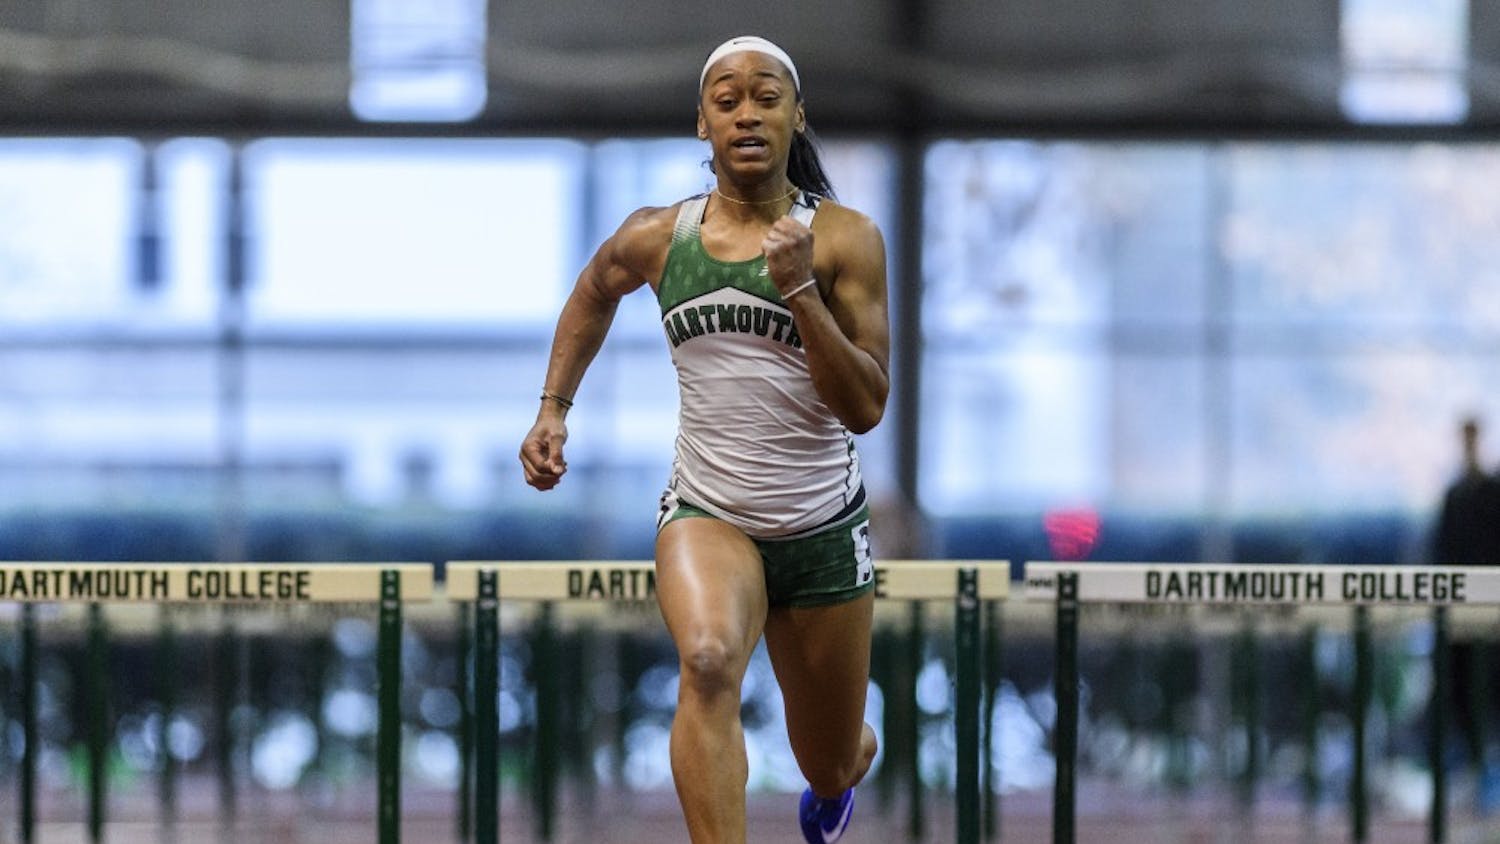 In 2017, Cha’Mia Rothwell ’20 set a new league record in the 60-meter hurdles.